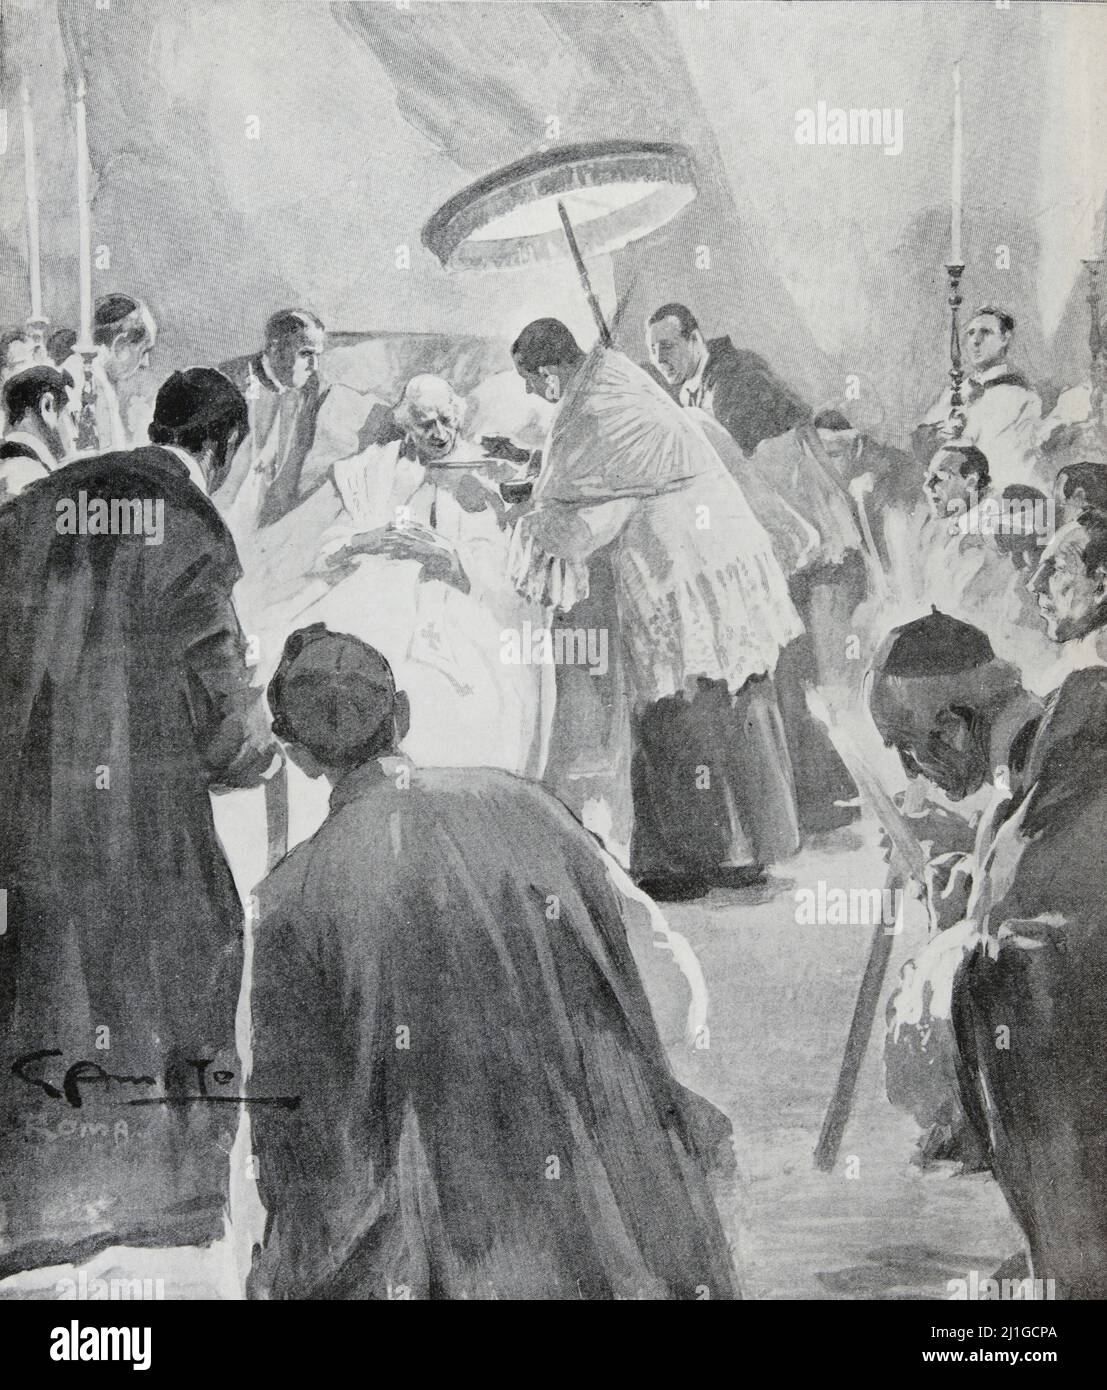 LA MALADIE DE S. S. LEON XIII LE PAPE RECEVANT LE VIATIQUE - eng translation :  THE ILLNESS OF S. S. LEON XIII THE POPE RECEIVING VIATICUM - Extract from 'L'Illustration Journal Universel' - French illustrated magazine - 1903 Stock Photo